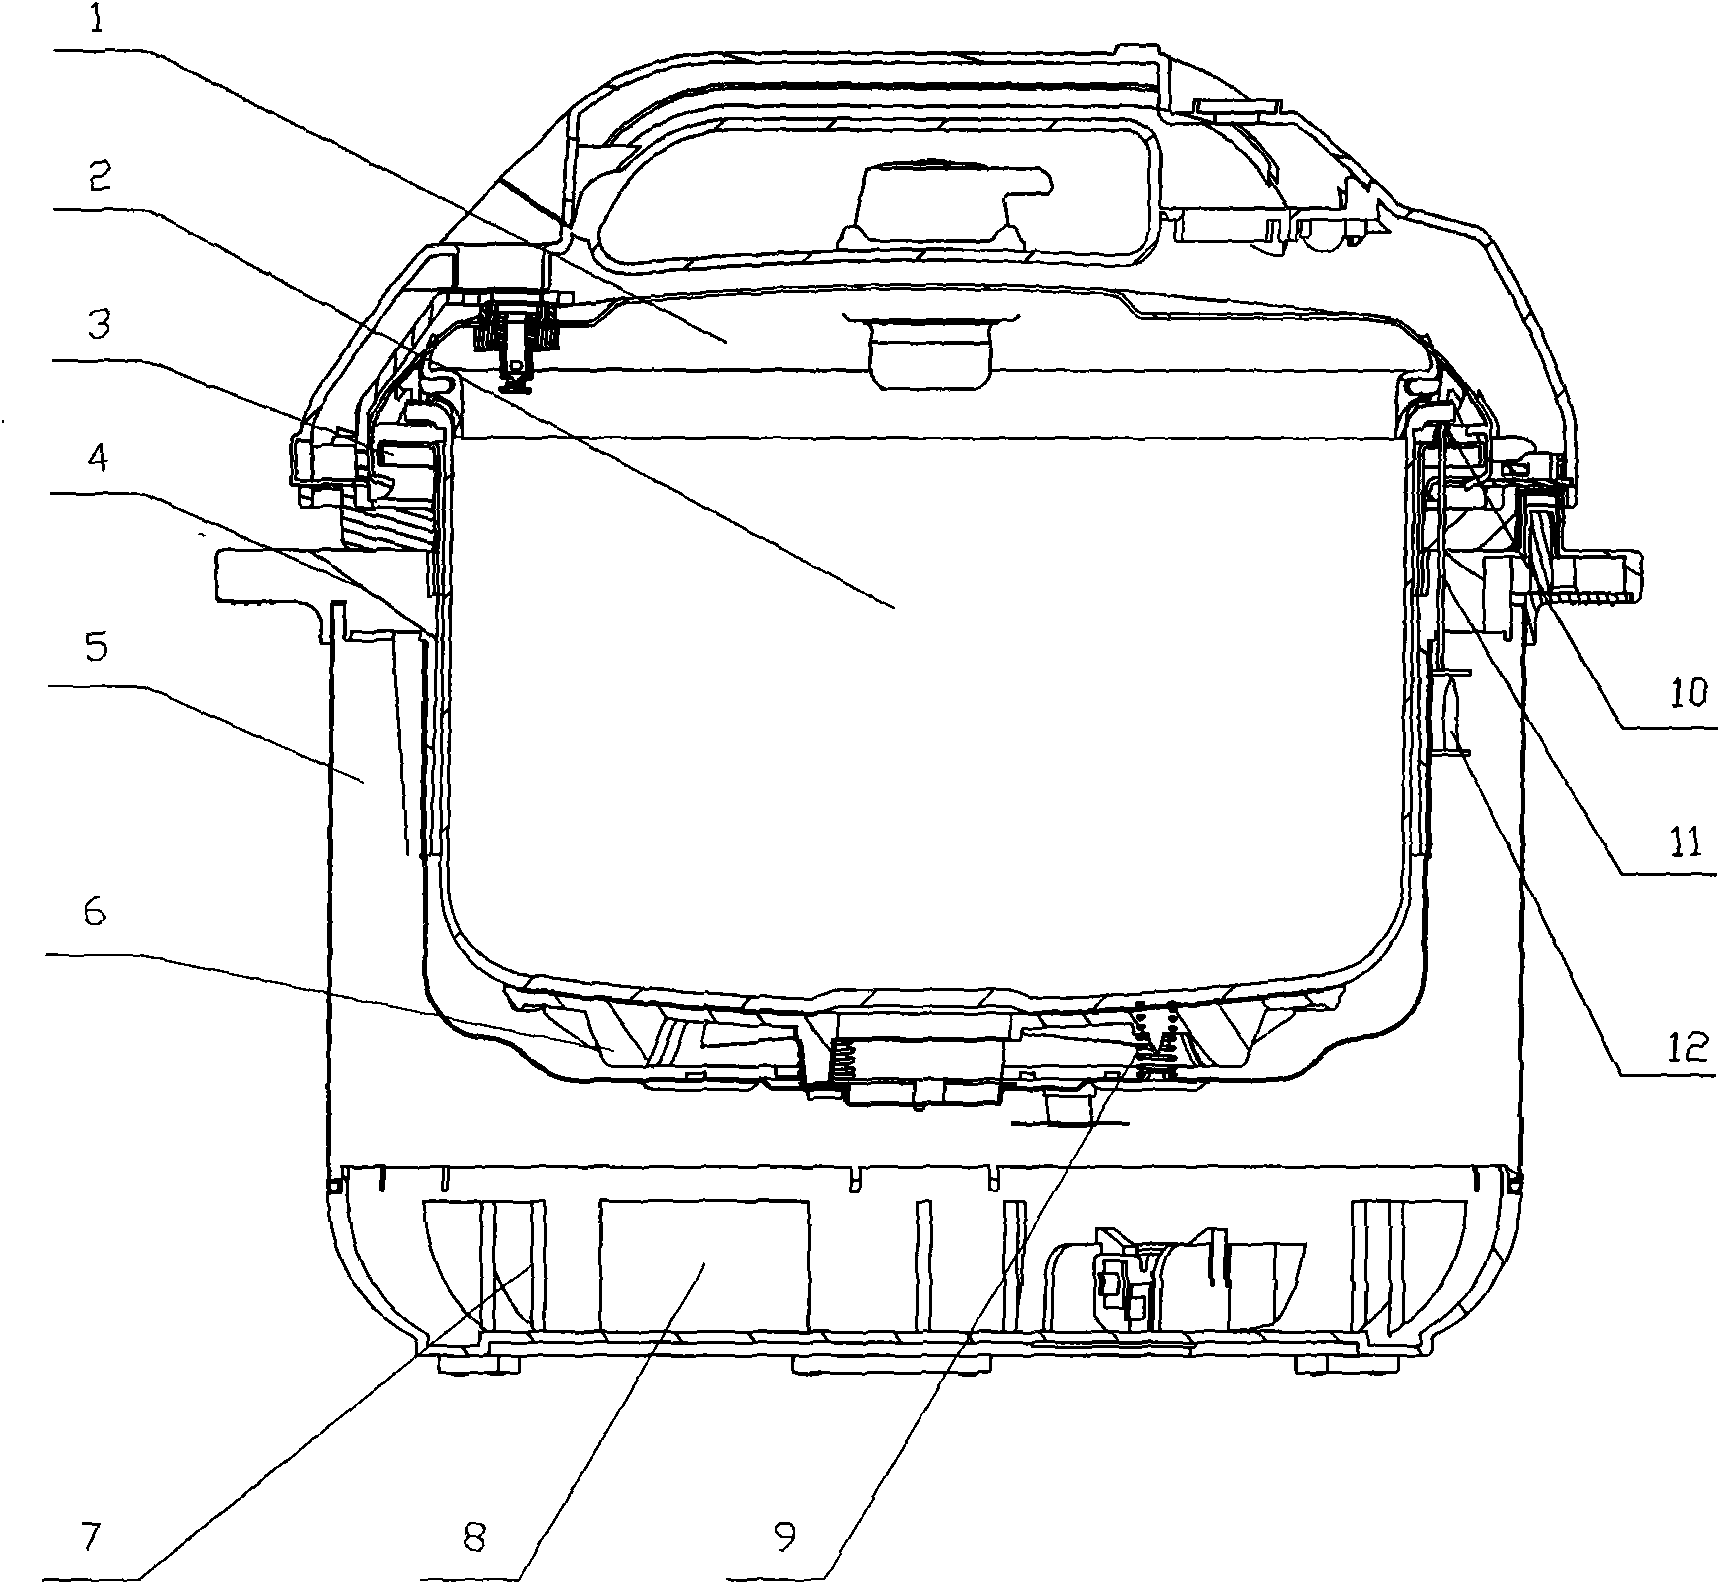 Pressure control structure of pressure cooking appliance